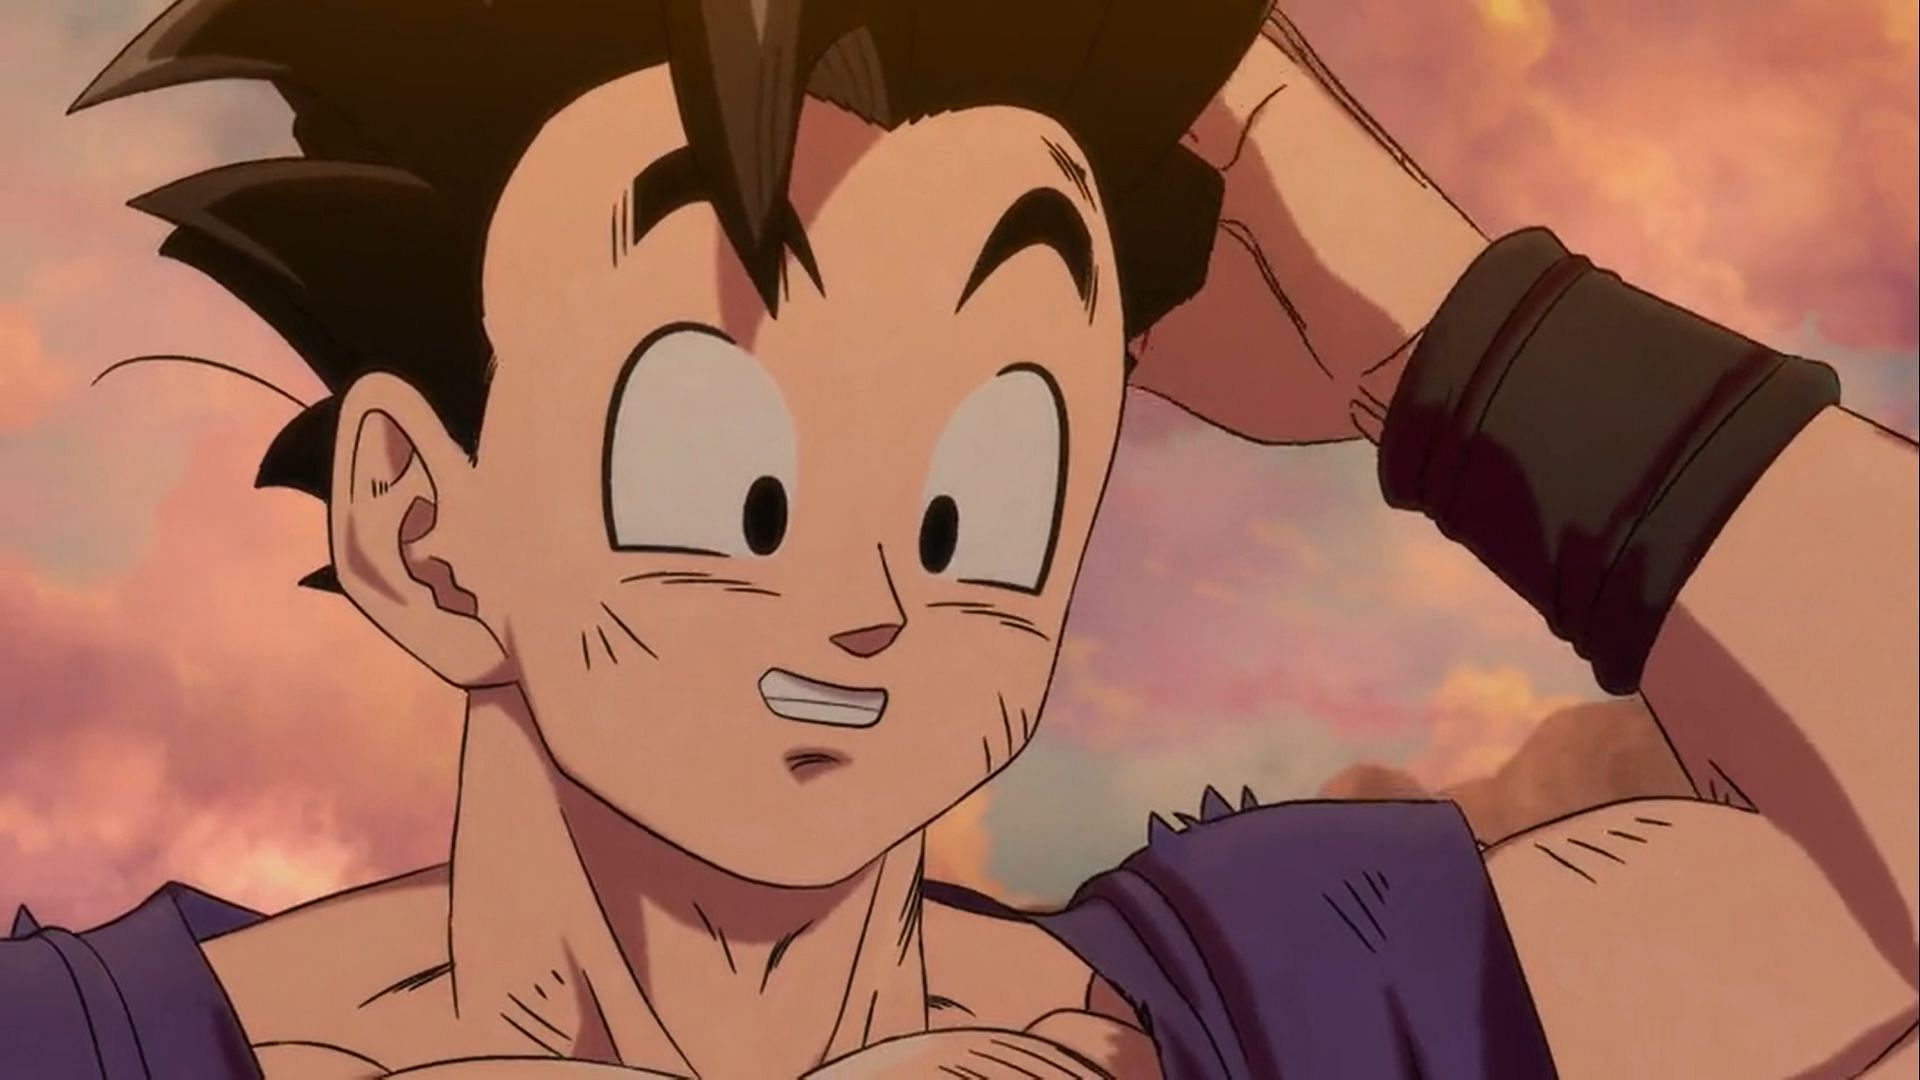 Dragon Ball Super finally hints at something fans have wanted for ages